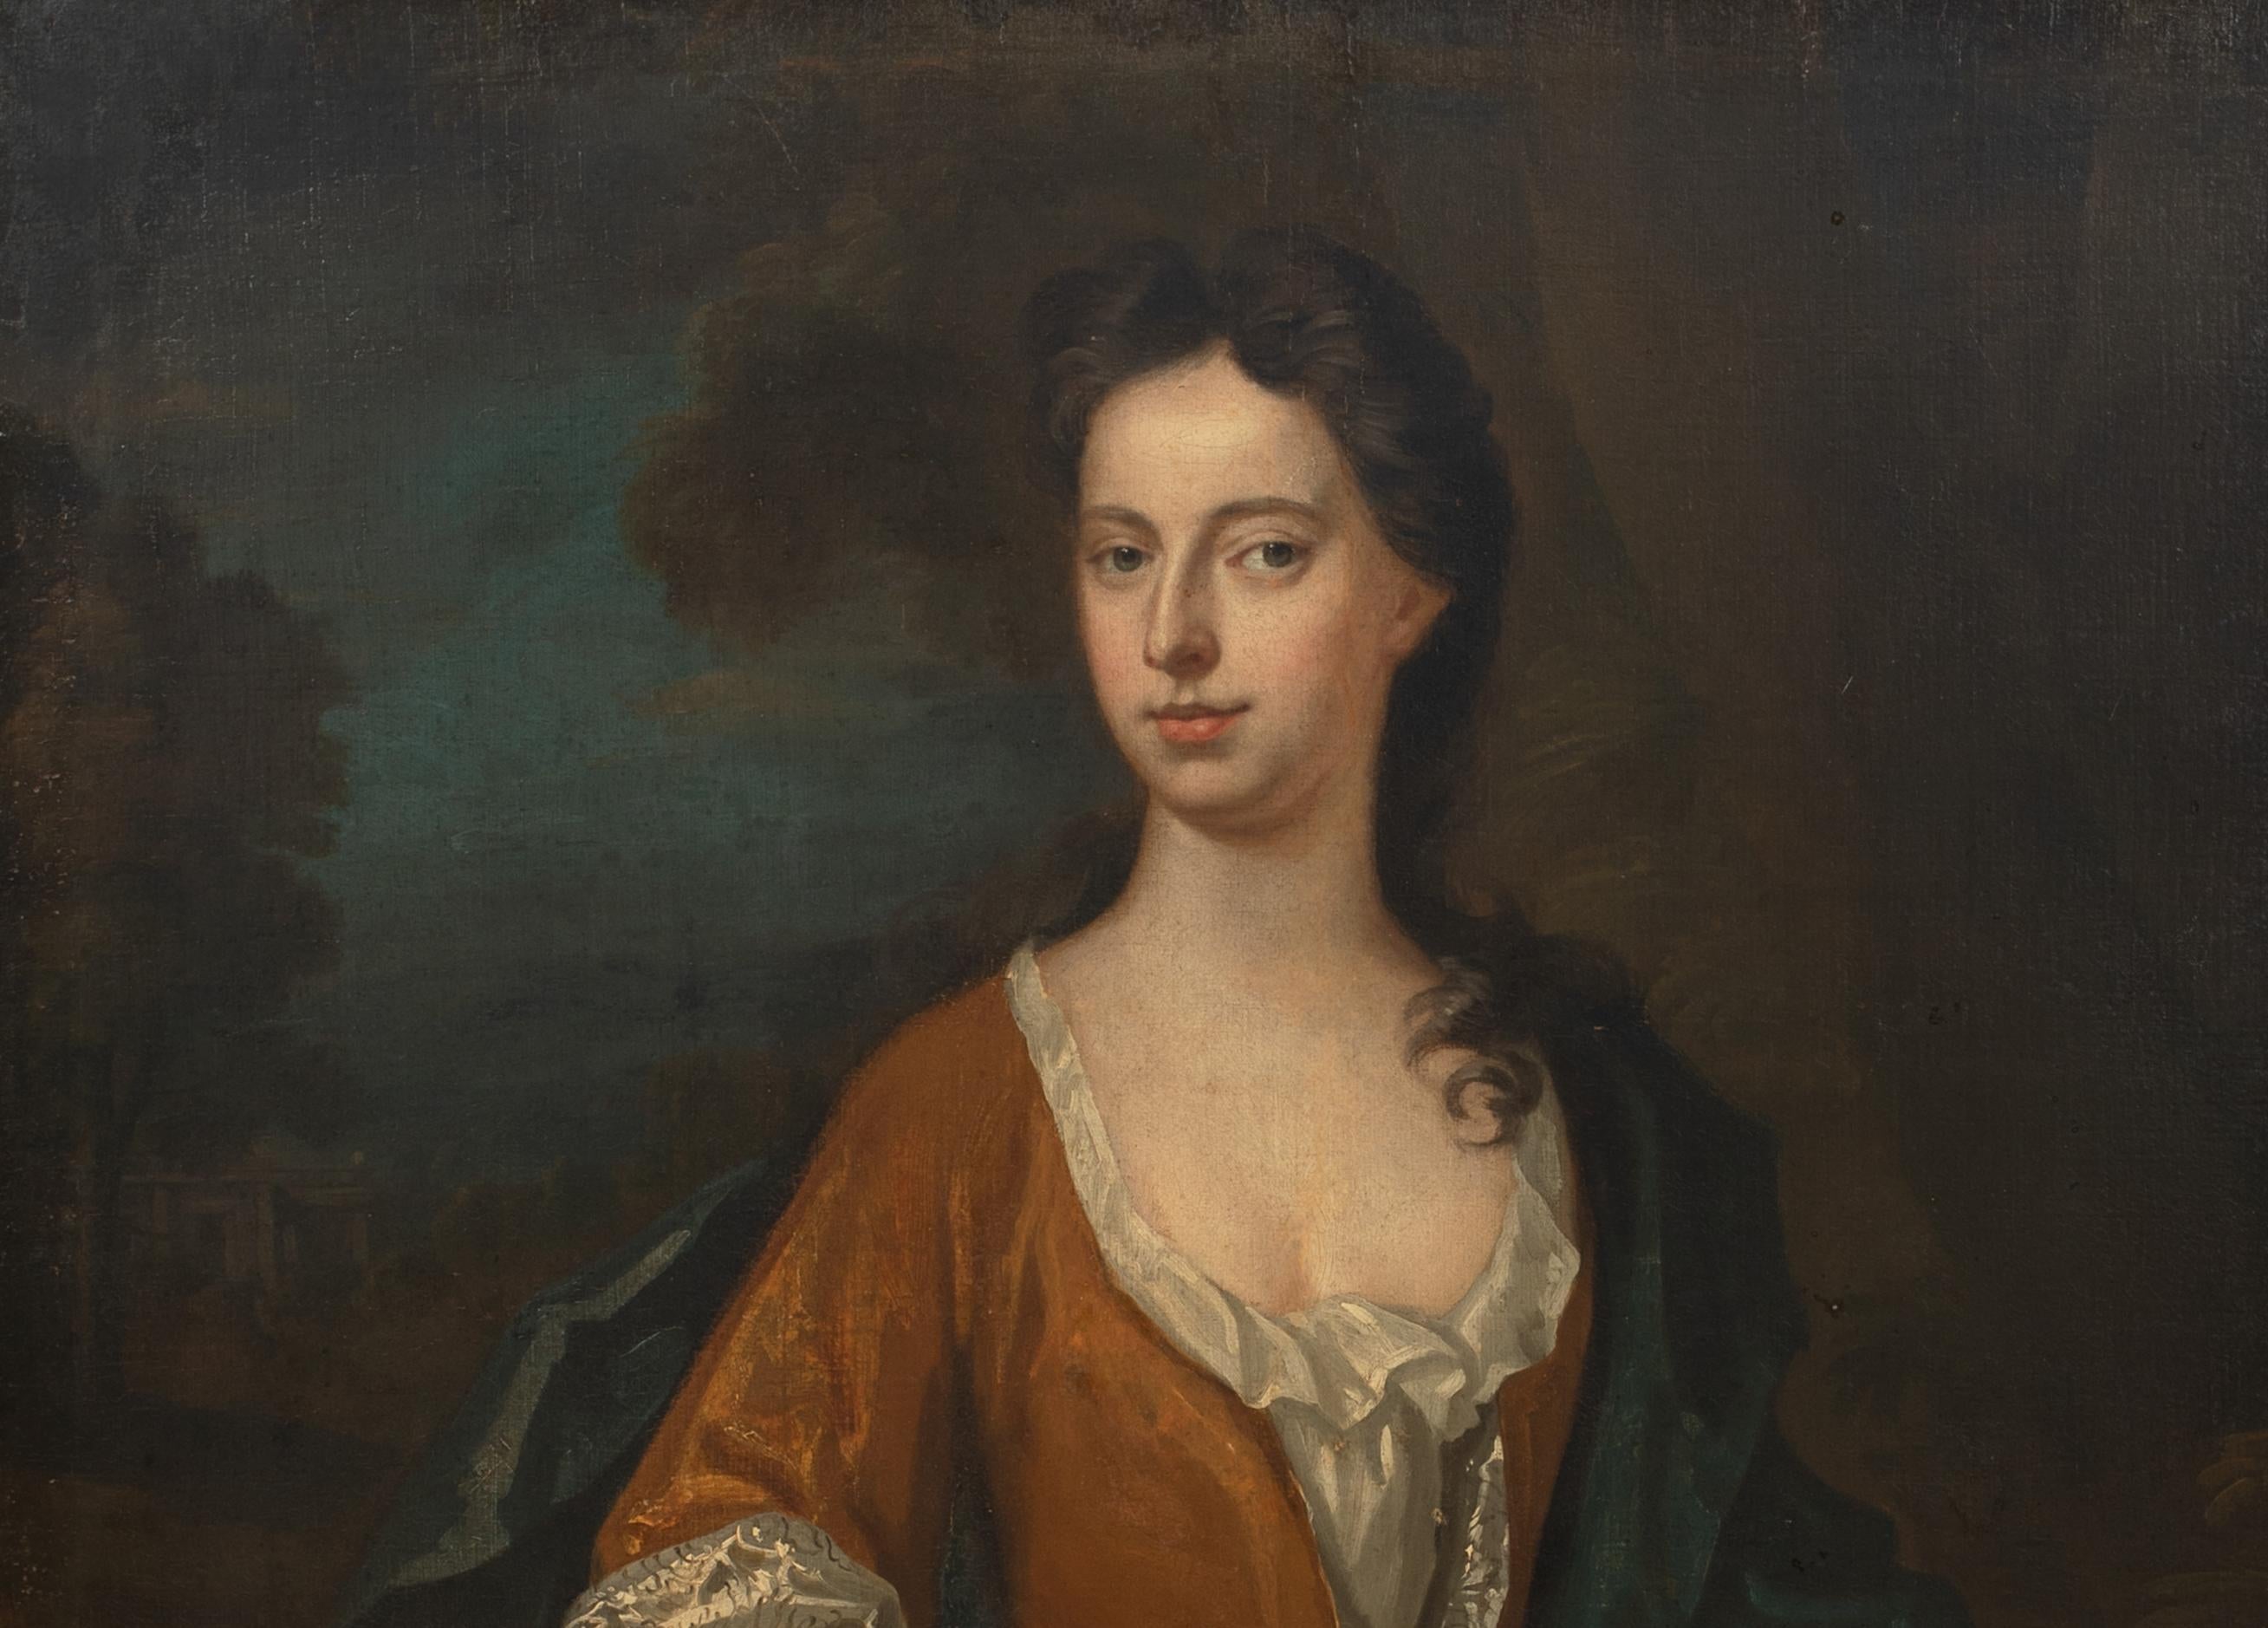 countess of bedford